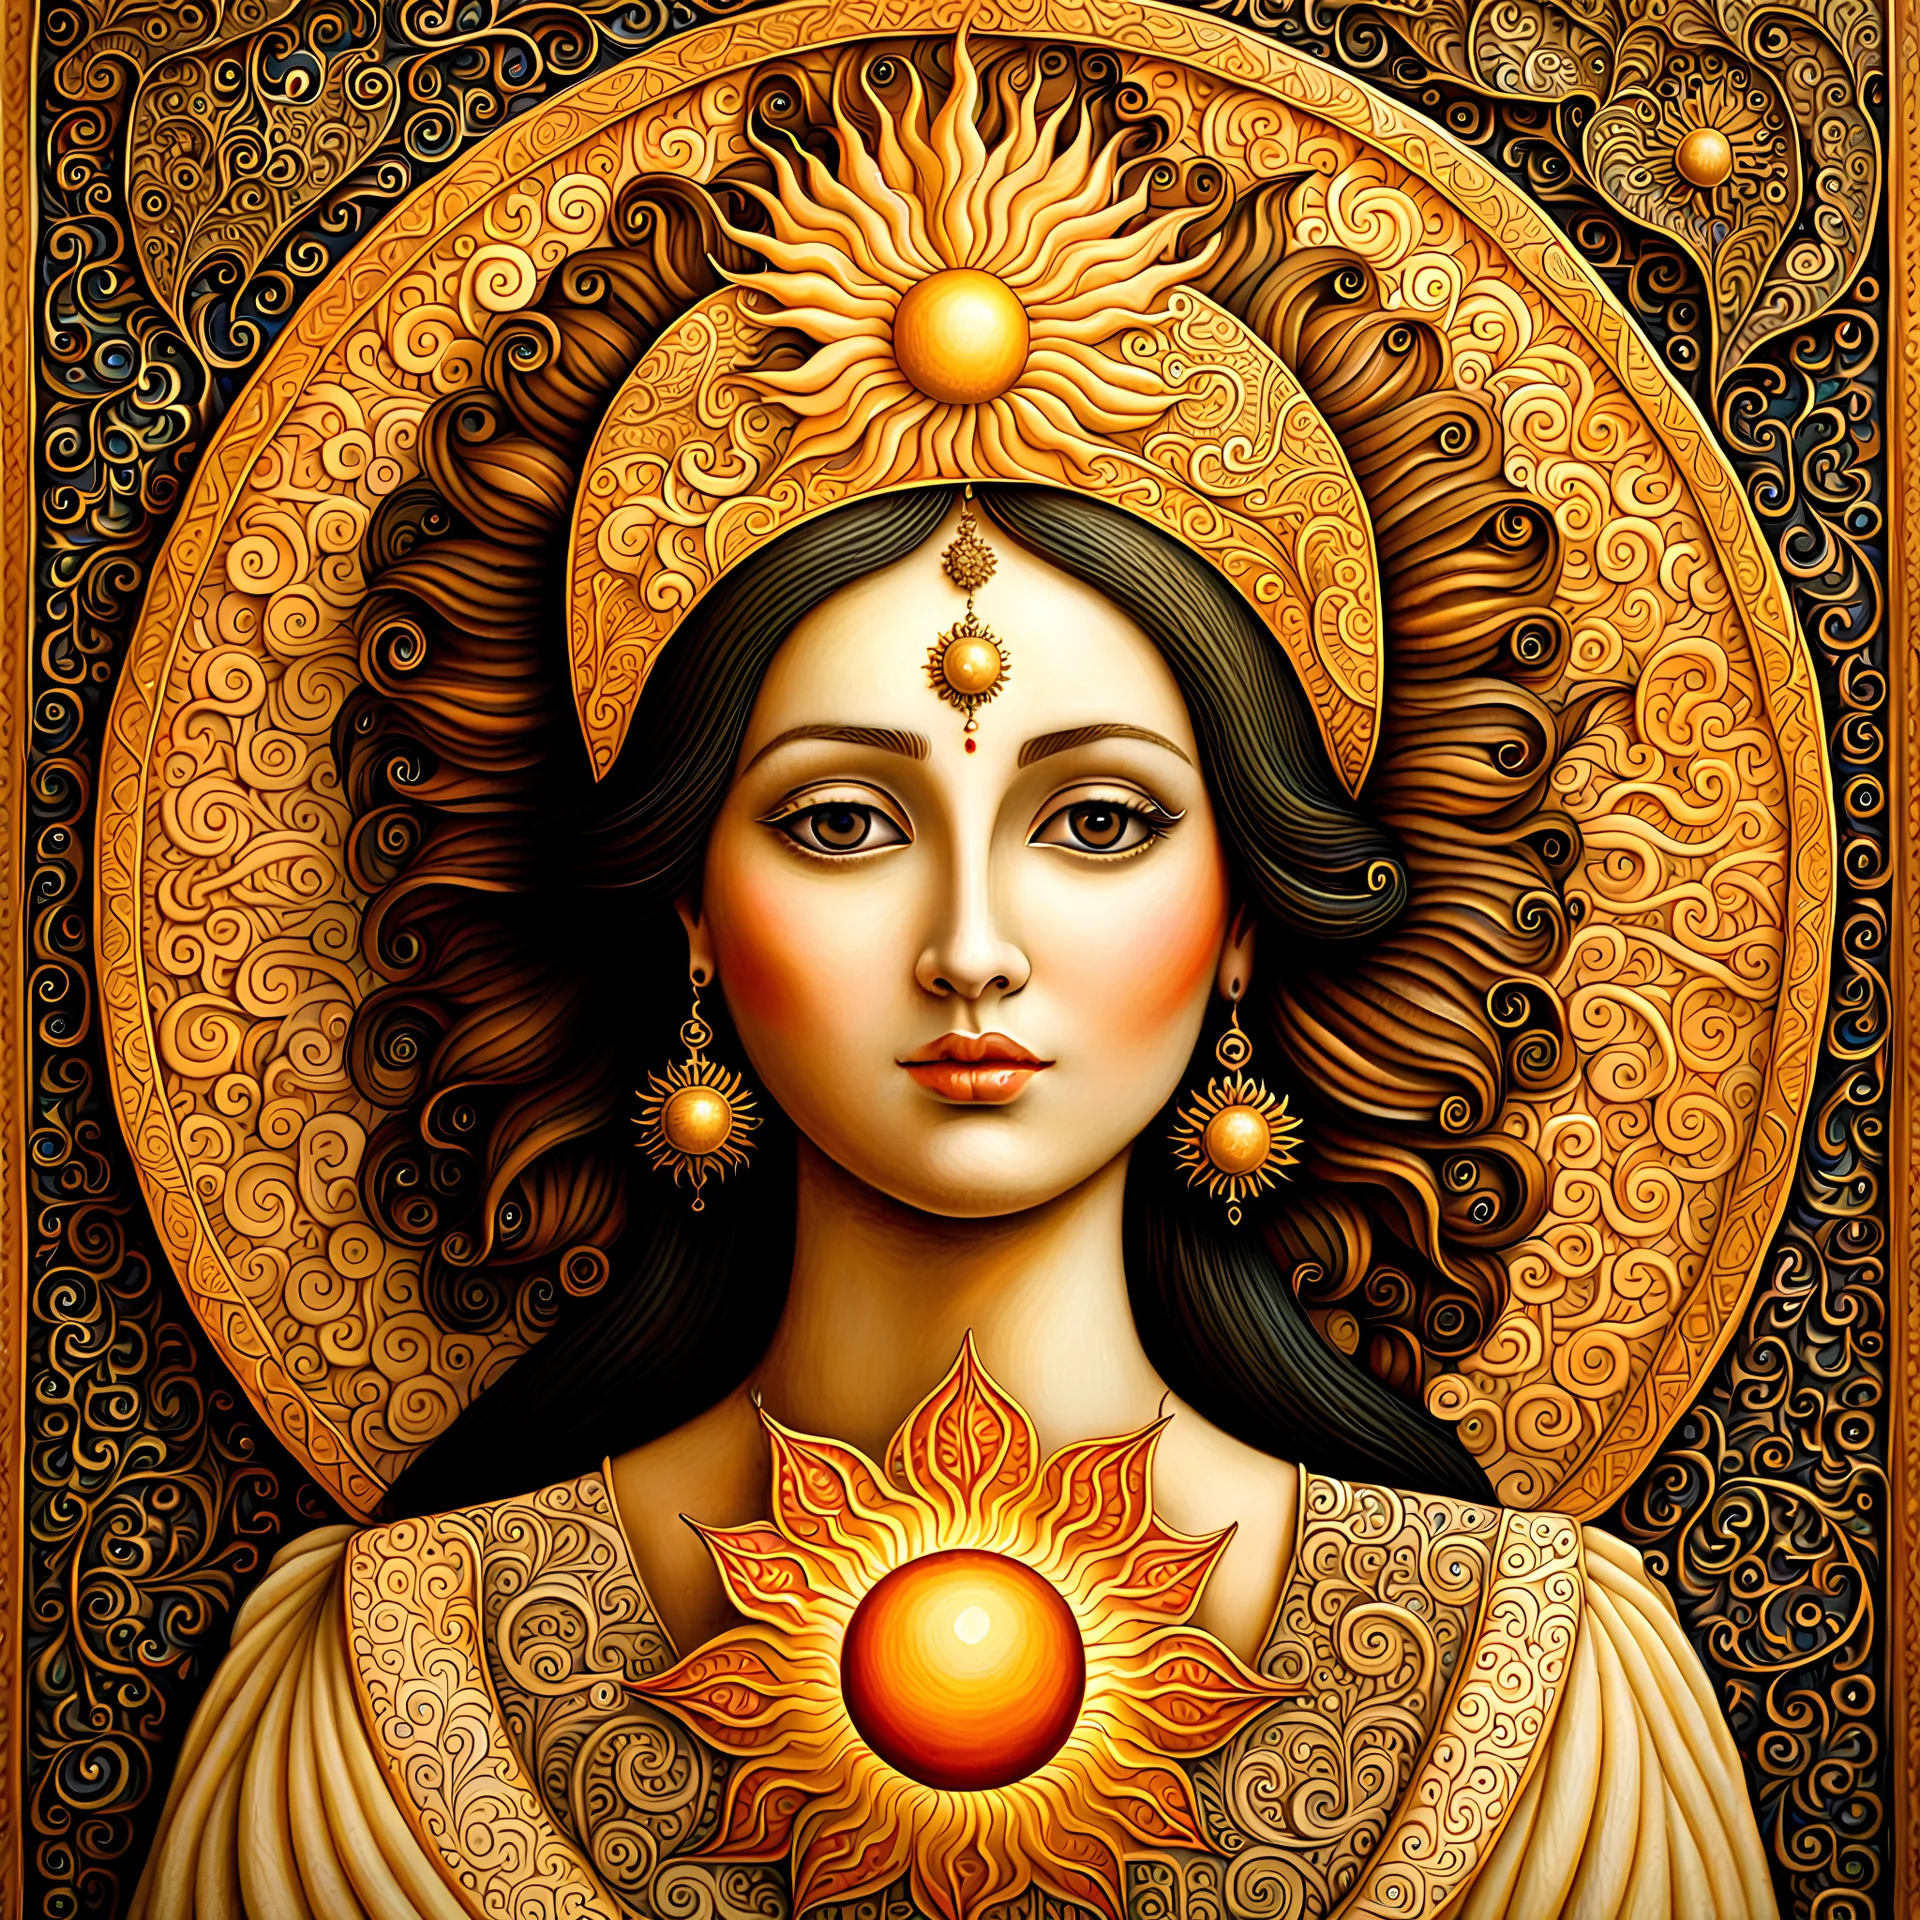 painting of a woman holding a sun, a detailed painting by Maryam Hashemi, deviantart, qajar art, naoto hattori, detailed wood carving, wood carving